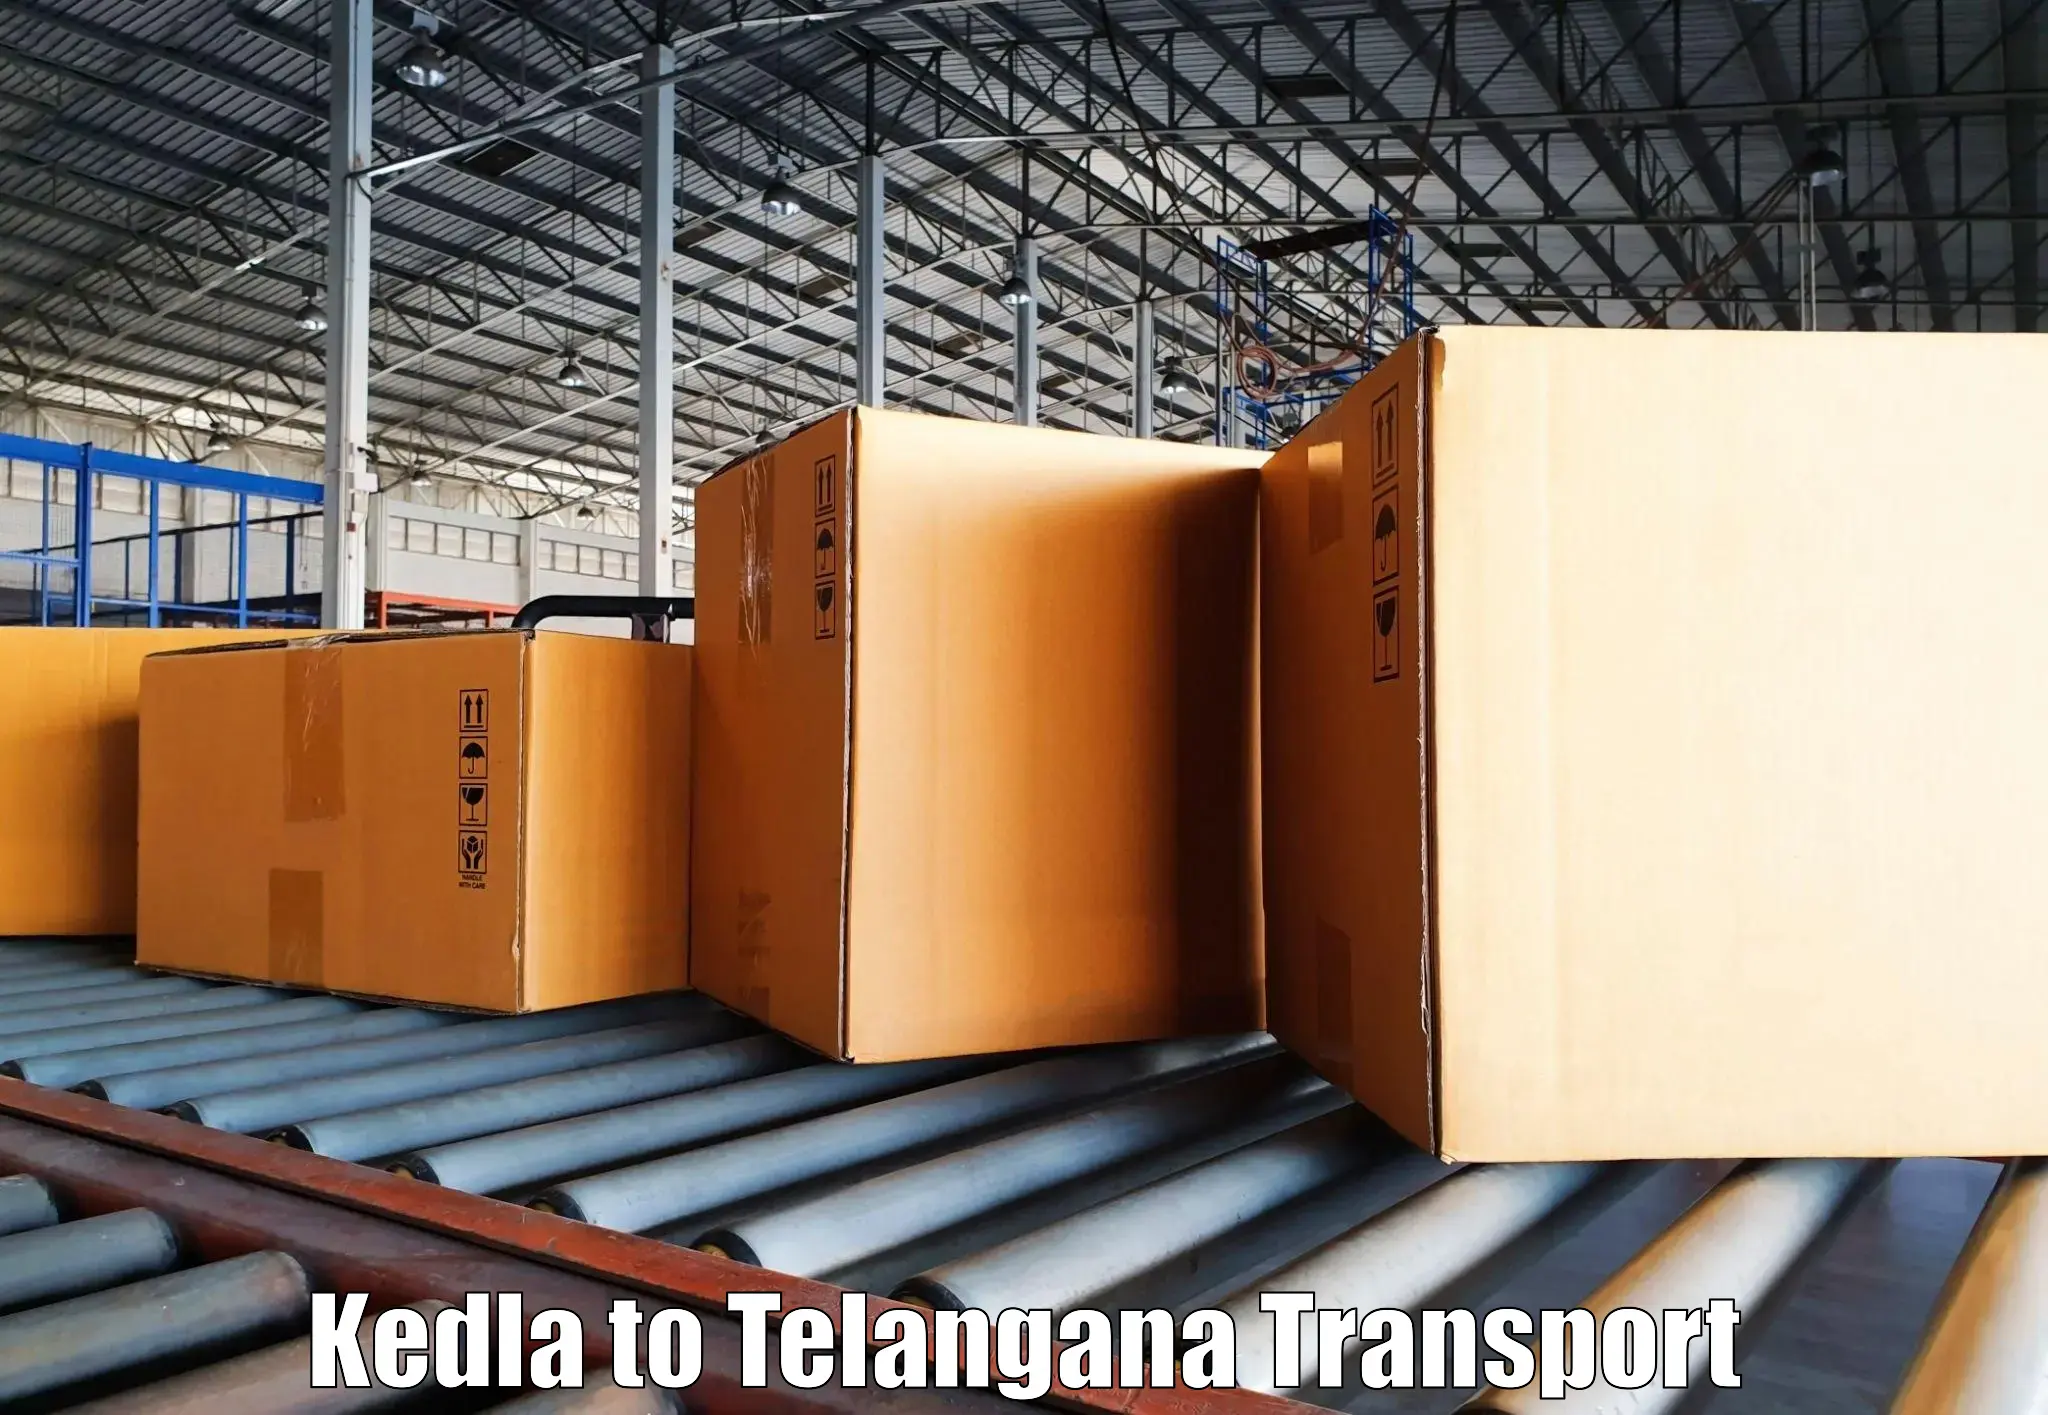 Container transport service Kedla to Manopad